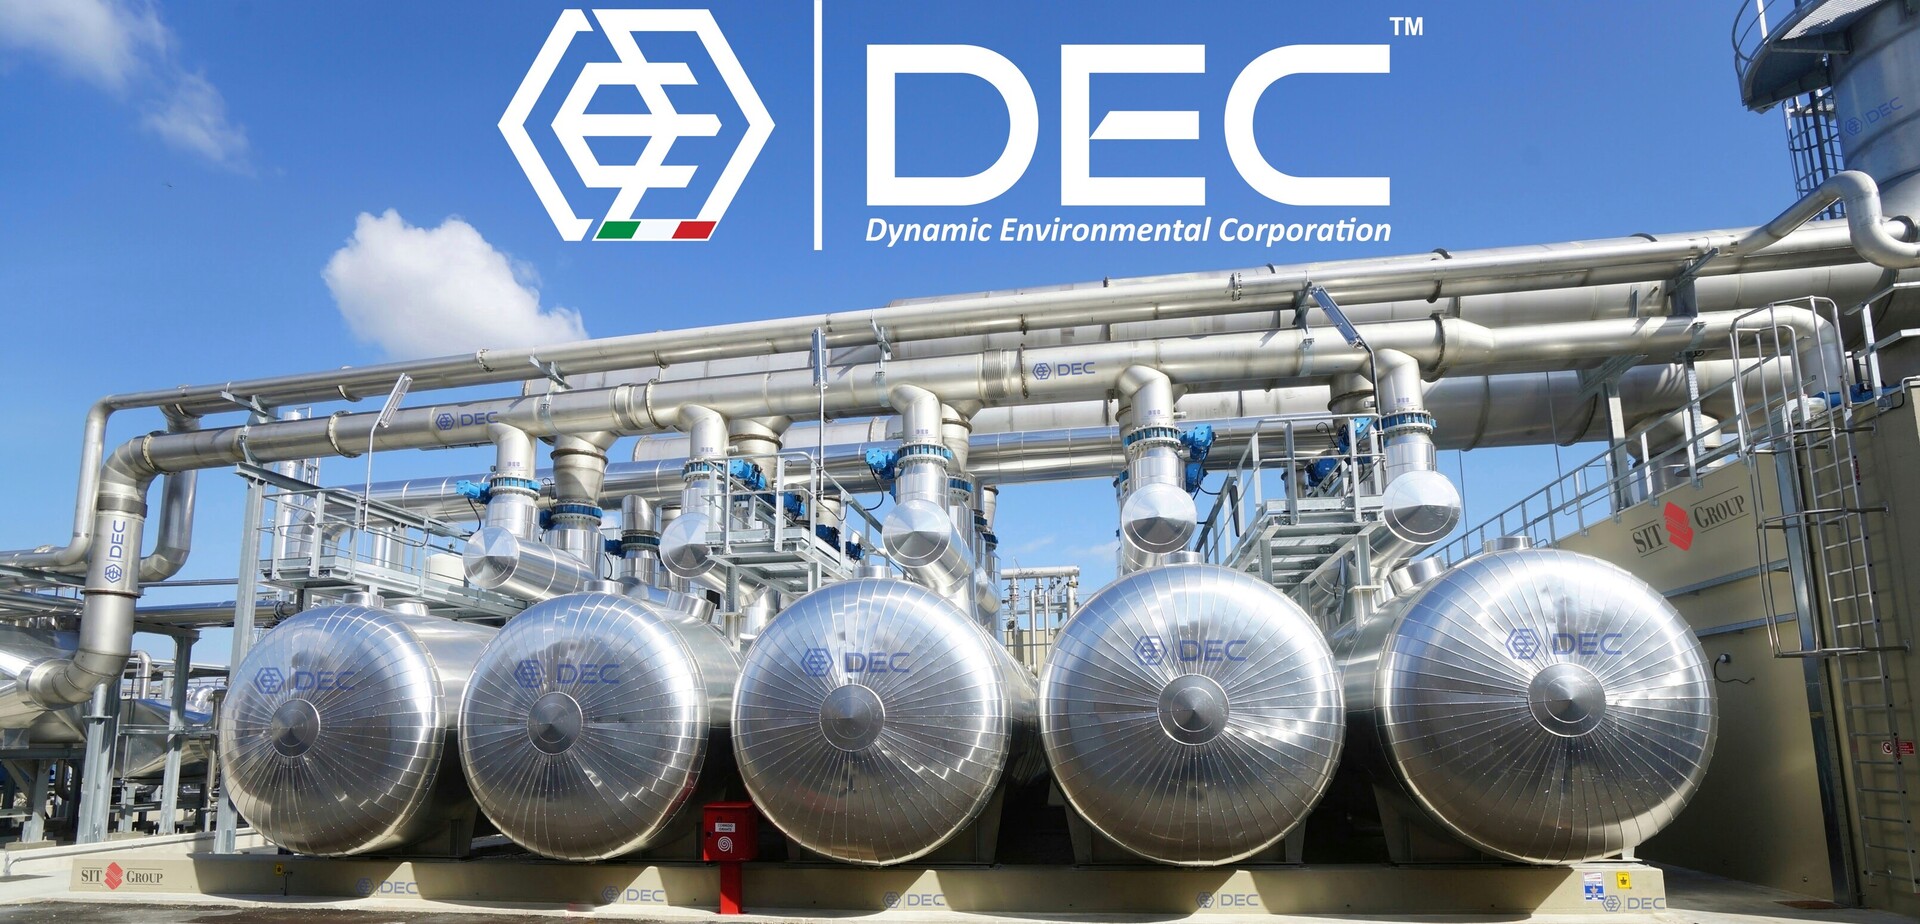 DEC, DEC IMPIANTI, DEC HOLDING, DEC SERVICE, DEC ENGINEERING, DEC AUTOMATION, DEC LAB, DEC ANALYTICS, DEC.CBS, CBS, SRU, Custom Built System, VOC emission control, solvent recovery, VOC recovery, VOC abatement, VOC emission control technology, VOC abatement systems, air pollution control, solvent recovery systems, environmental compliance, VOC recovery system, solvent recovery unit, VOC recovery equipment, BAT, Best Available Technique, BREF, IED, Industrial Emissions Directive, solvent recovery equipment, solvent recycling, VOC capture, solvent reclamation, solvent purification, VOC treatment, solvent regeneration, distillation, solvent distillation, VOC recovery process, activated carbon, adsorbent, nitrogen, oxidizer, thermal oxidation, regenerative thermal oxidizer, LEL monitoring, solvent recovery for flexible packaging, flexible packaging, converting, engineering, supply, turnkey, sustainable, innovation, decarbonization, low carbon emissions, green deal, carbon reduction, low carbon, carbon neutrality, net-zero emissions, greenhouse gas mitigation, carbon footprint, carbon capture and storage (CCS), GHG, CO2, energy efficiency, chemical recycling, recycling, sustainability solutions, sustainability, reclaiming, carbon offset, circular economy, climate change, climate policy, climate action, environmental challenges, sustainable development, sustainability roadmap, ESG, TBL